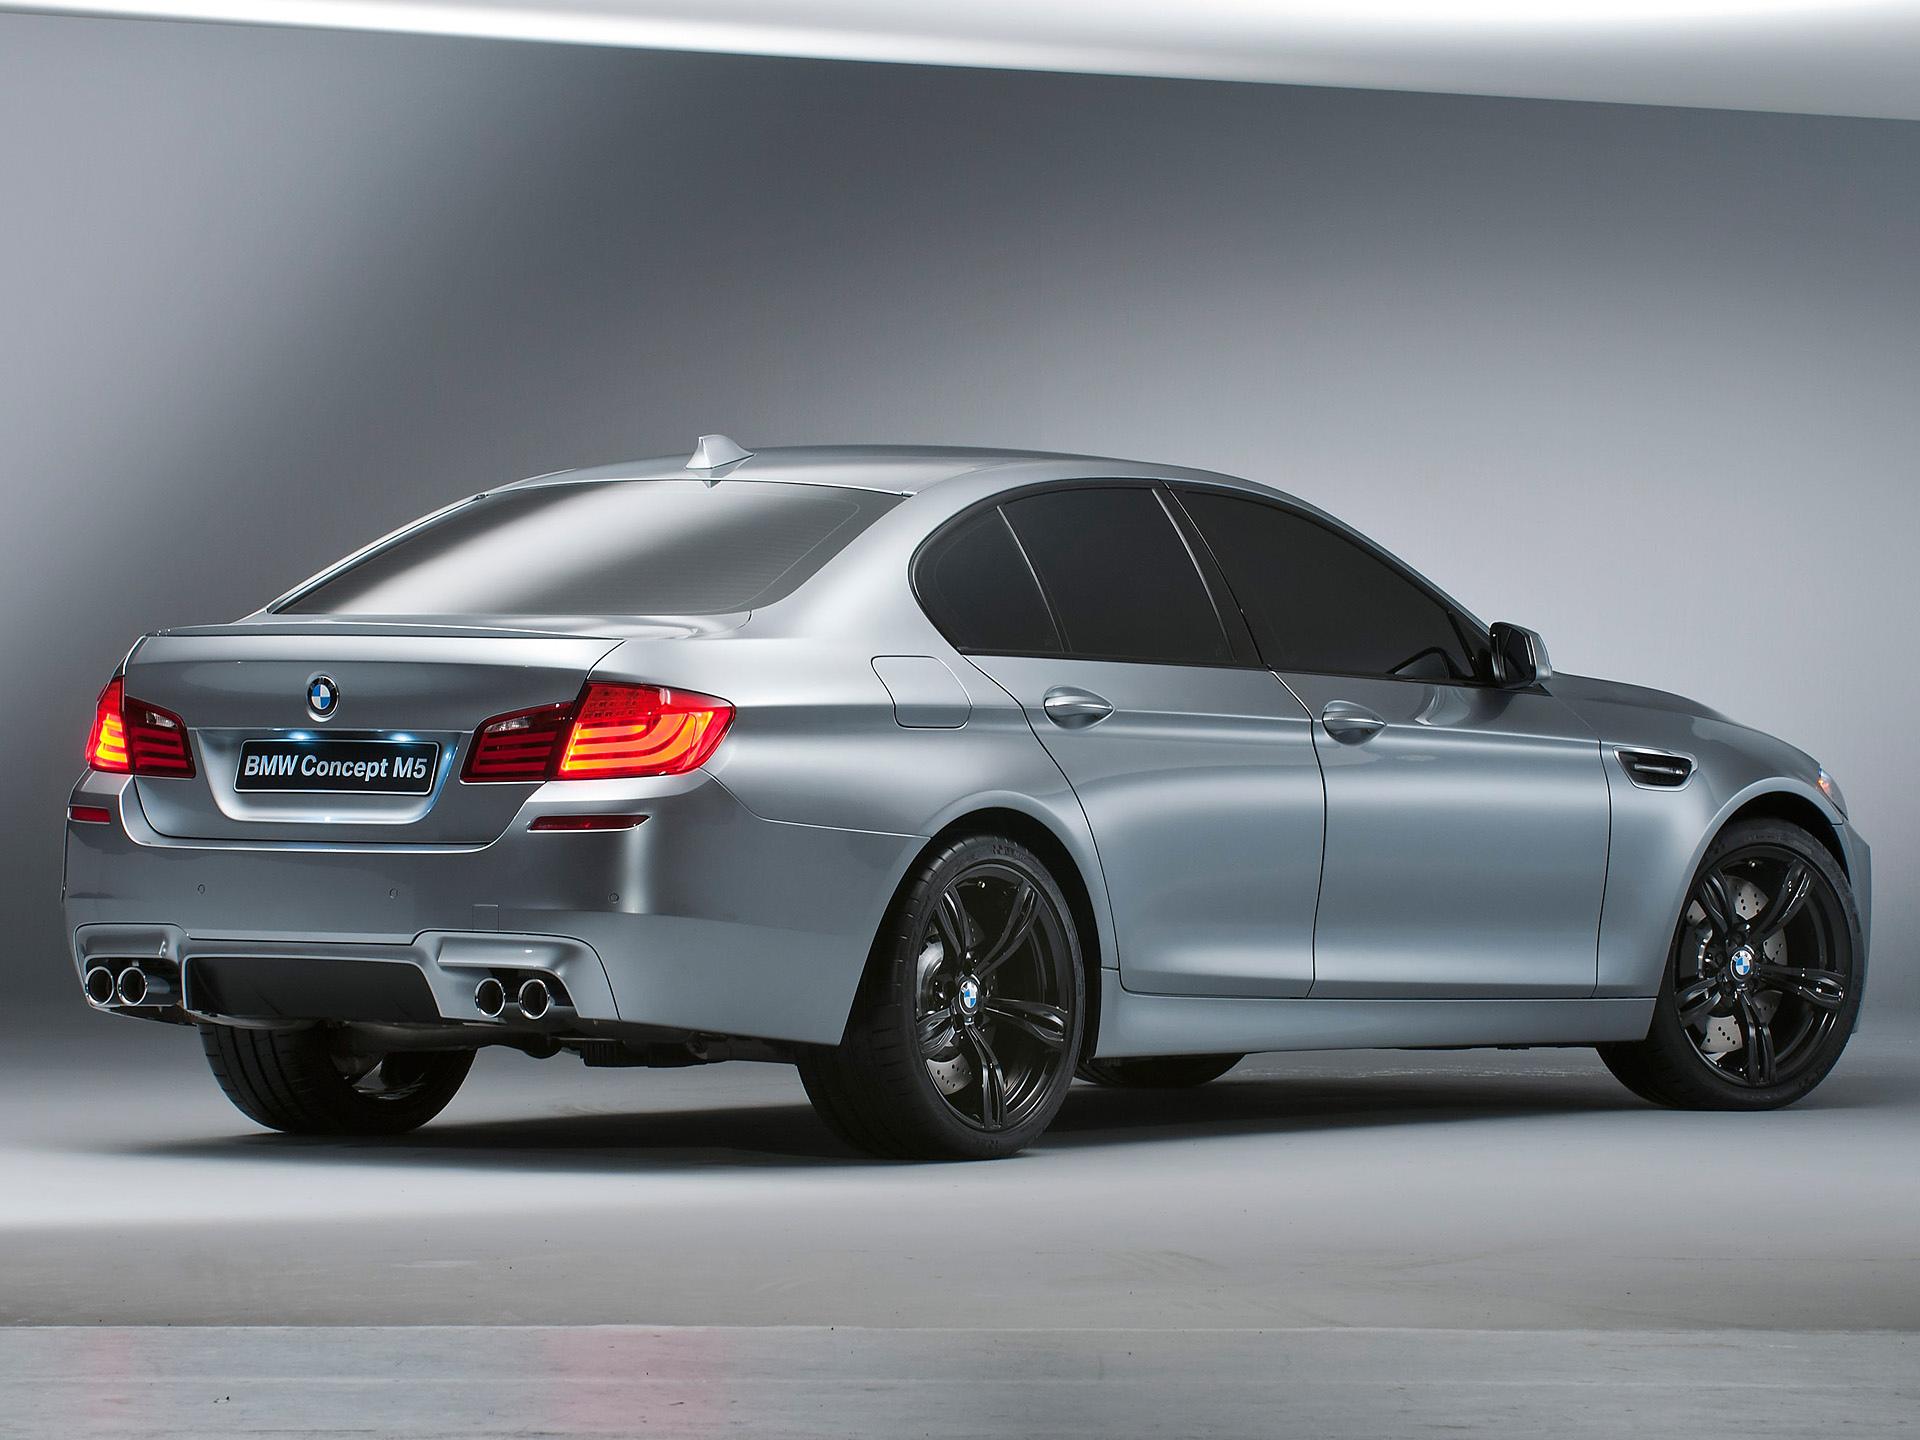 2012 BMW Concept M5 wallpapers HD quality